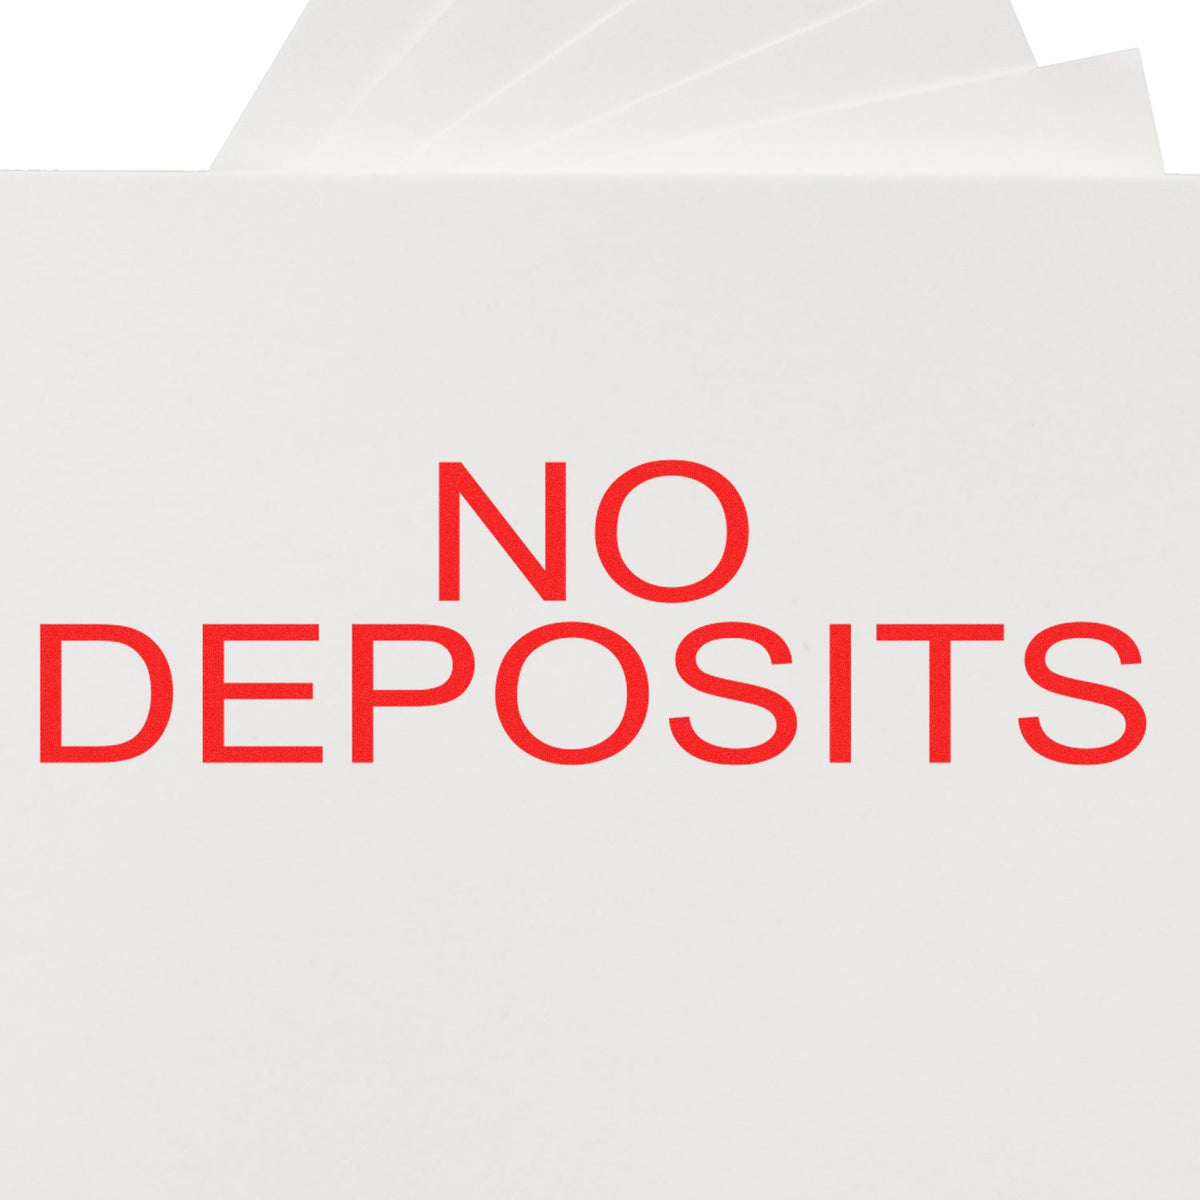 No Deposits Rubber Stamp In Use Photo